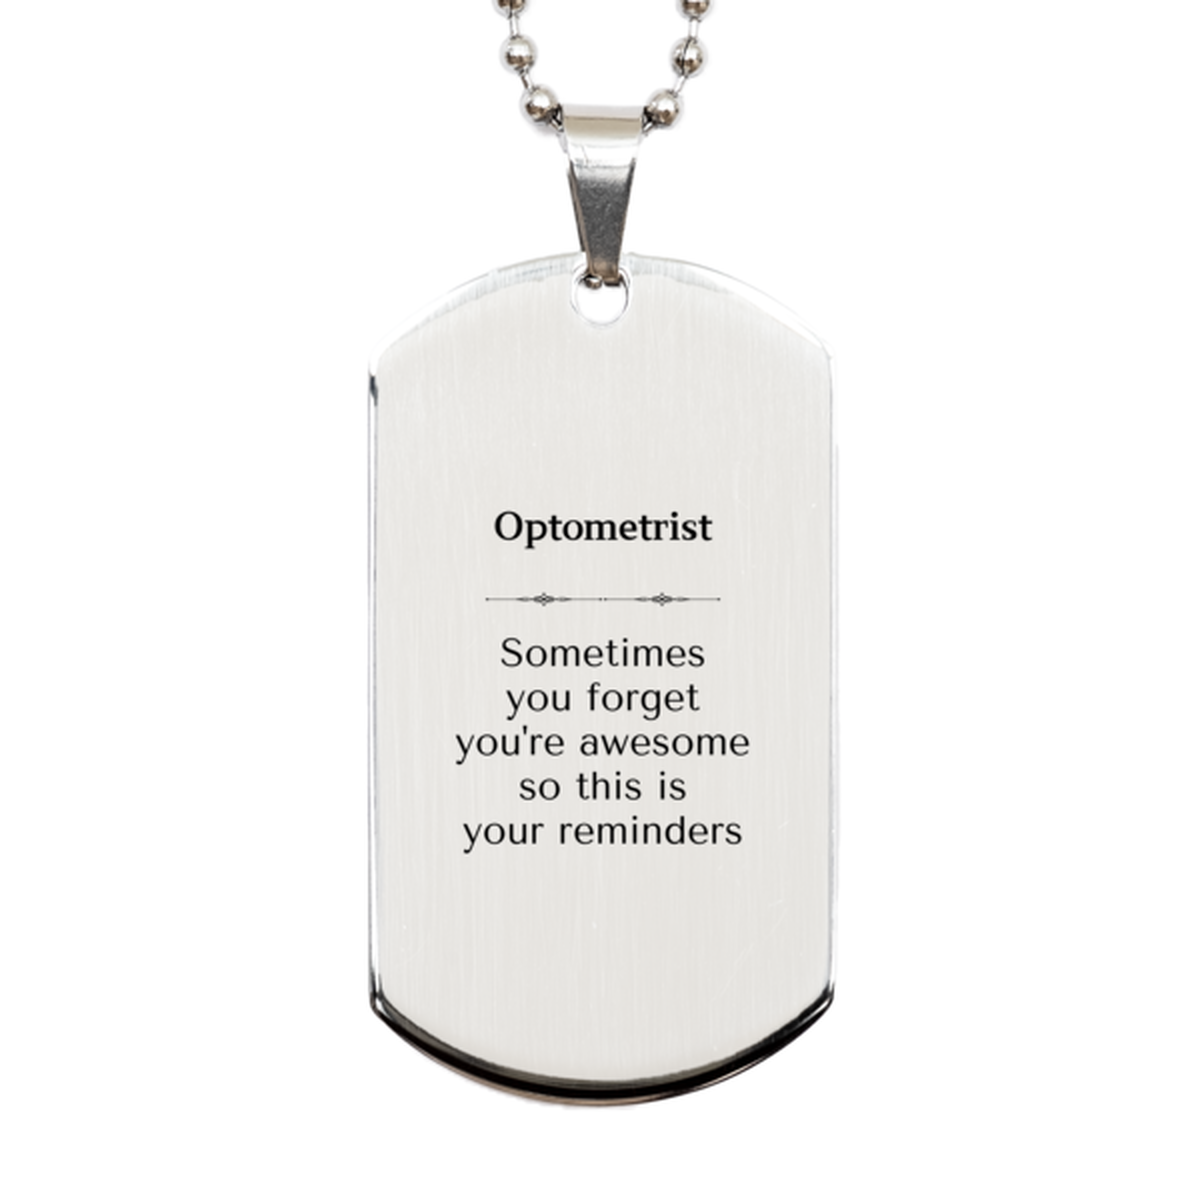 Sentimental Optometrist Silver Dog Tag, Optometrist Sometimes you forget you're awesome so this is your reminders, Graduation Christmas Birthday Gifts for Optometrist, Men, Women, Coworkers